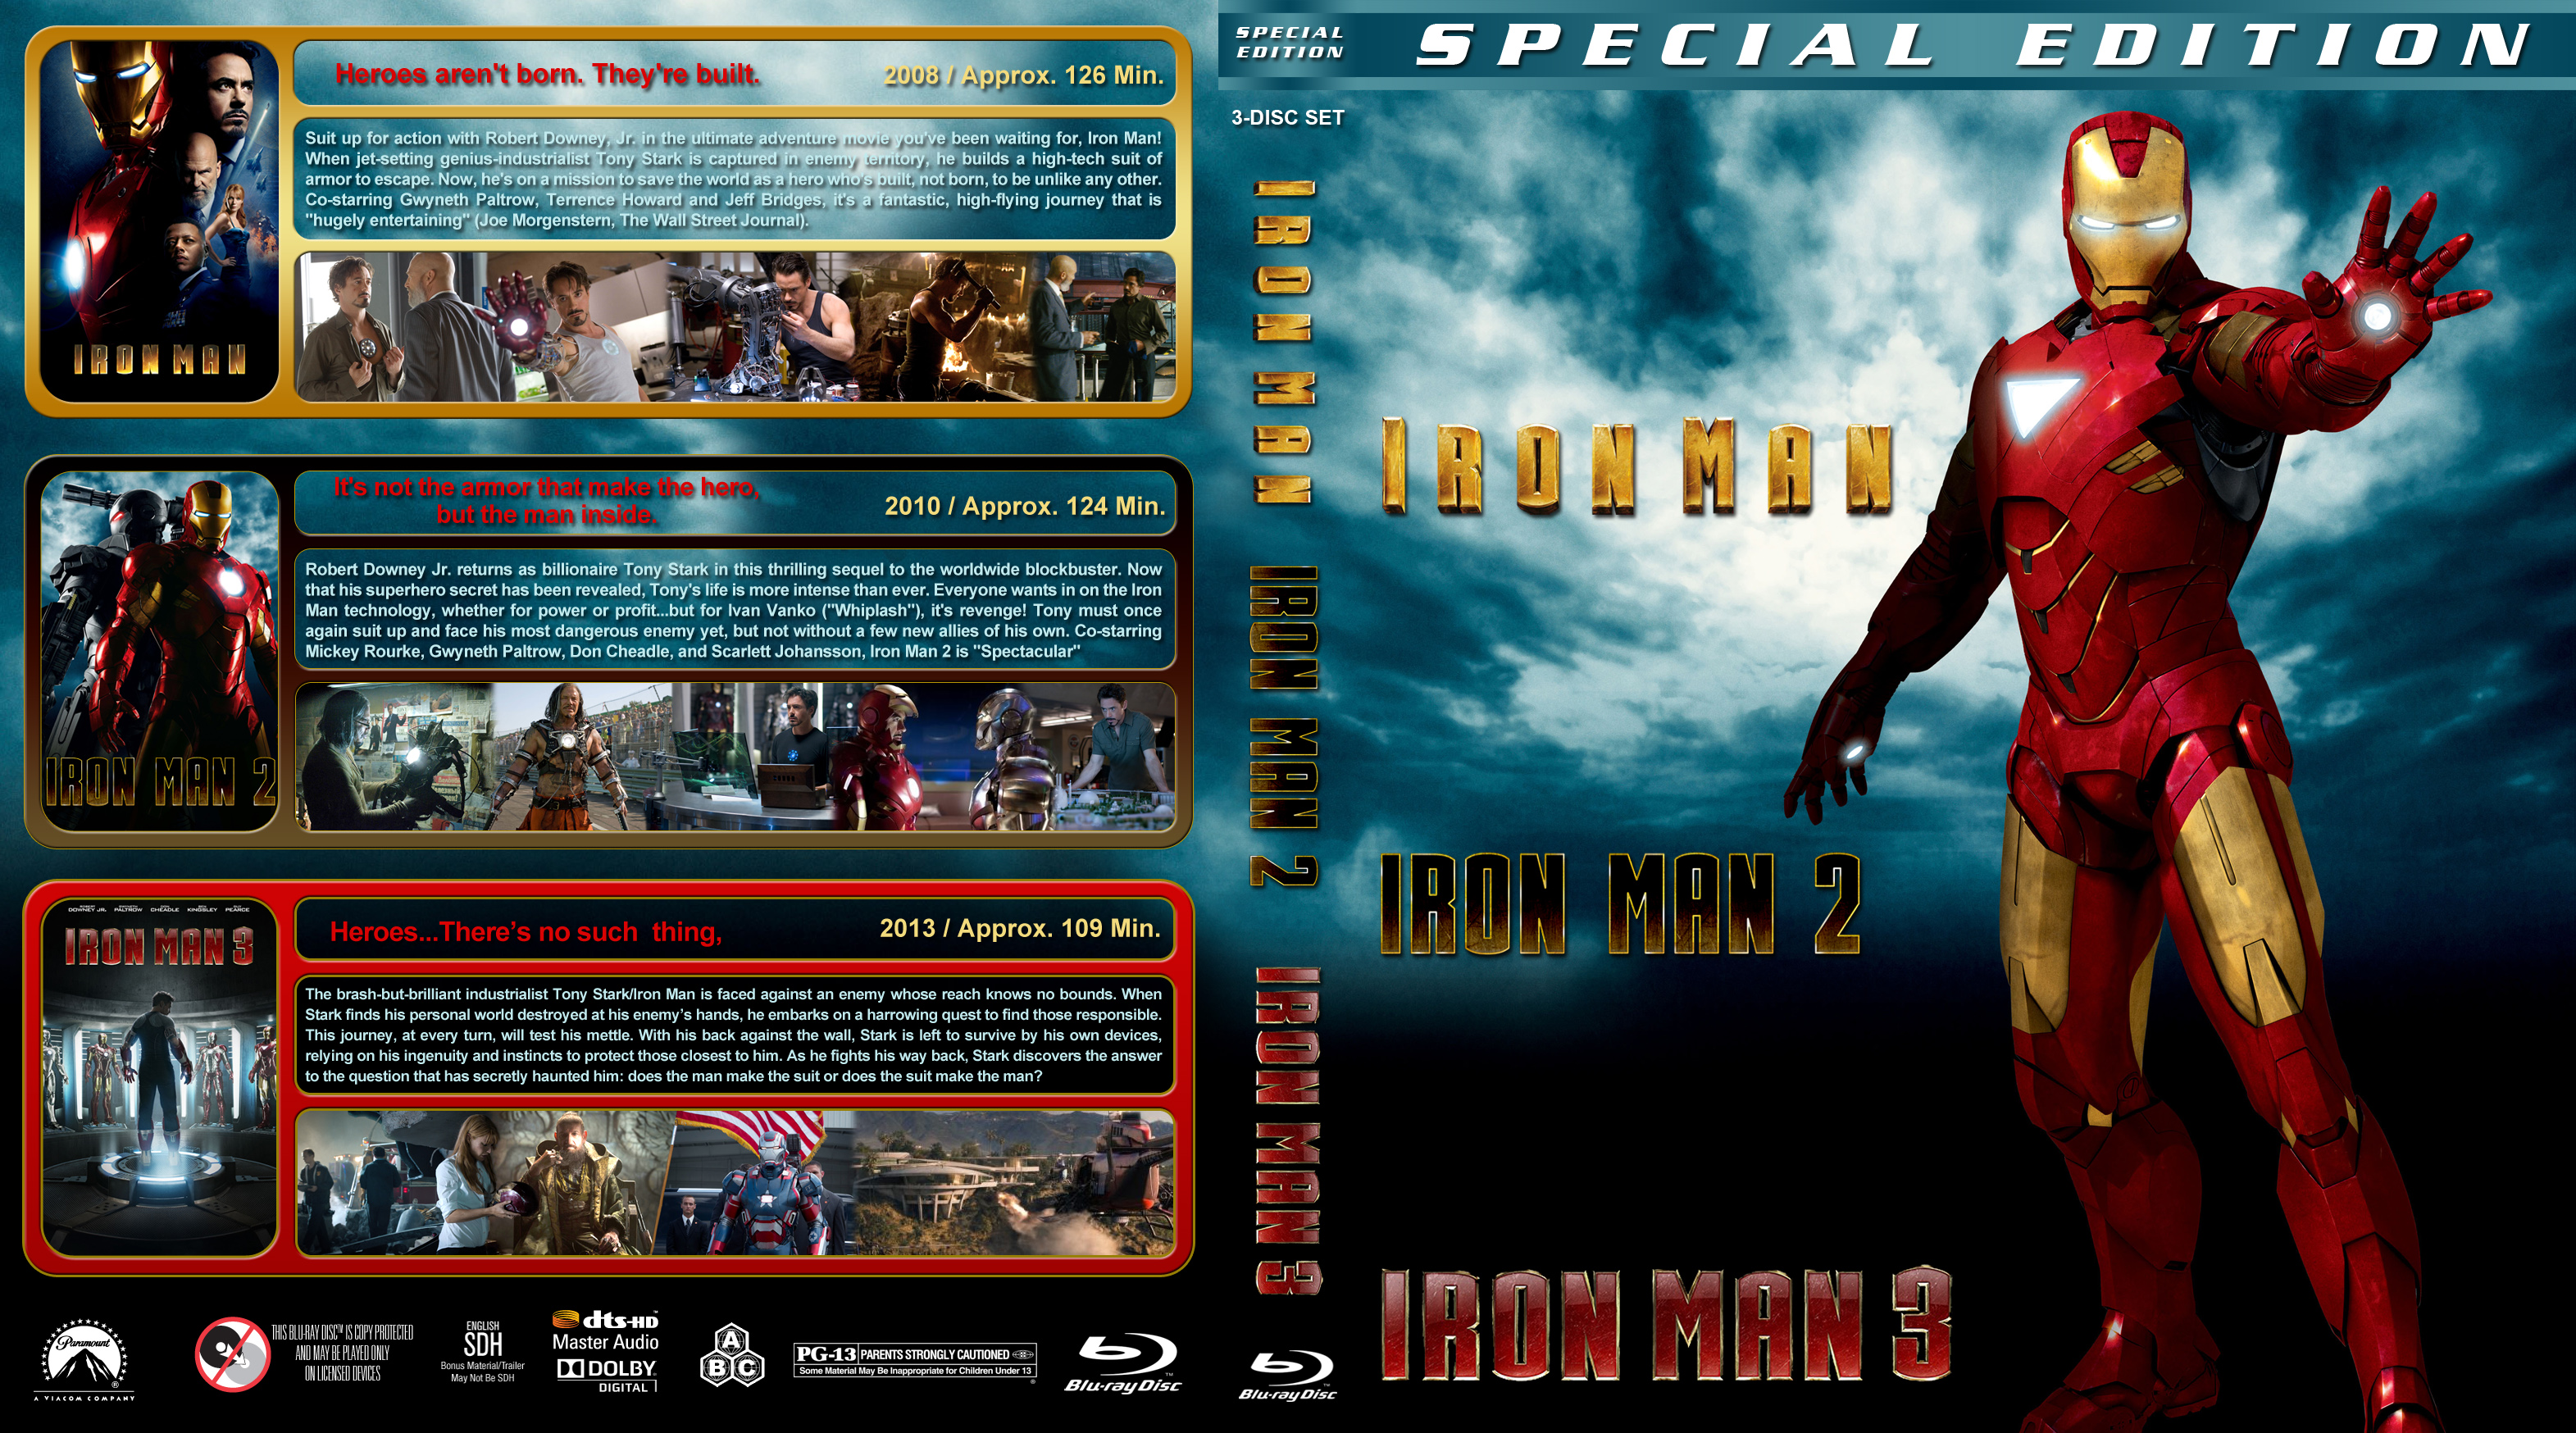 Iron Man Trilogy Version 2 Br Dvd Covers Cover Century Over 500 000 Album Art Covers For Free